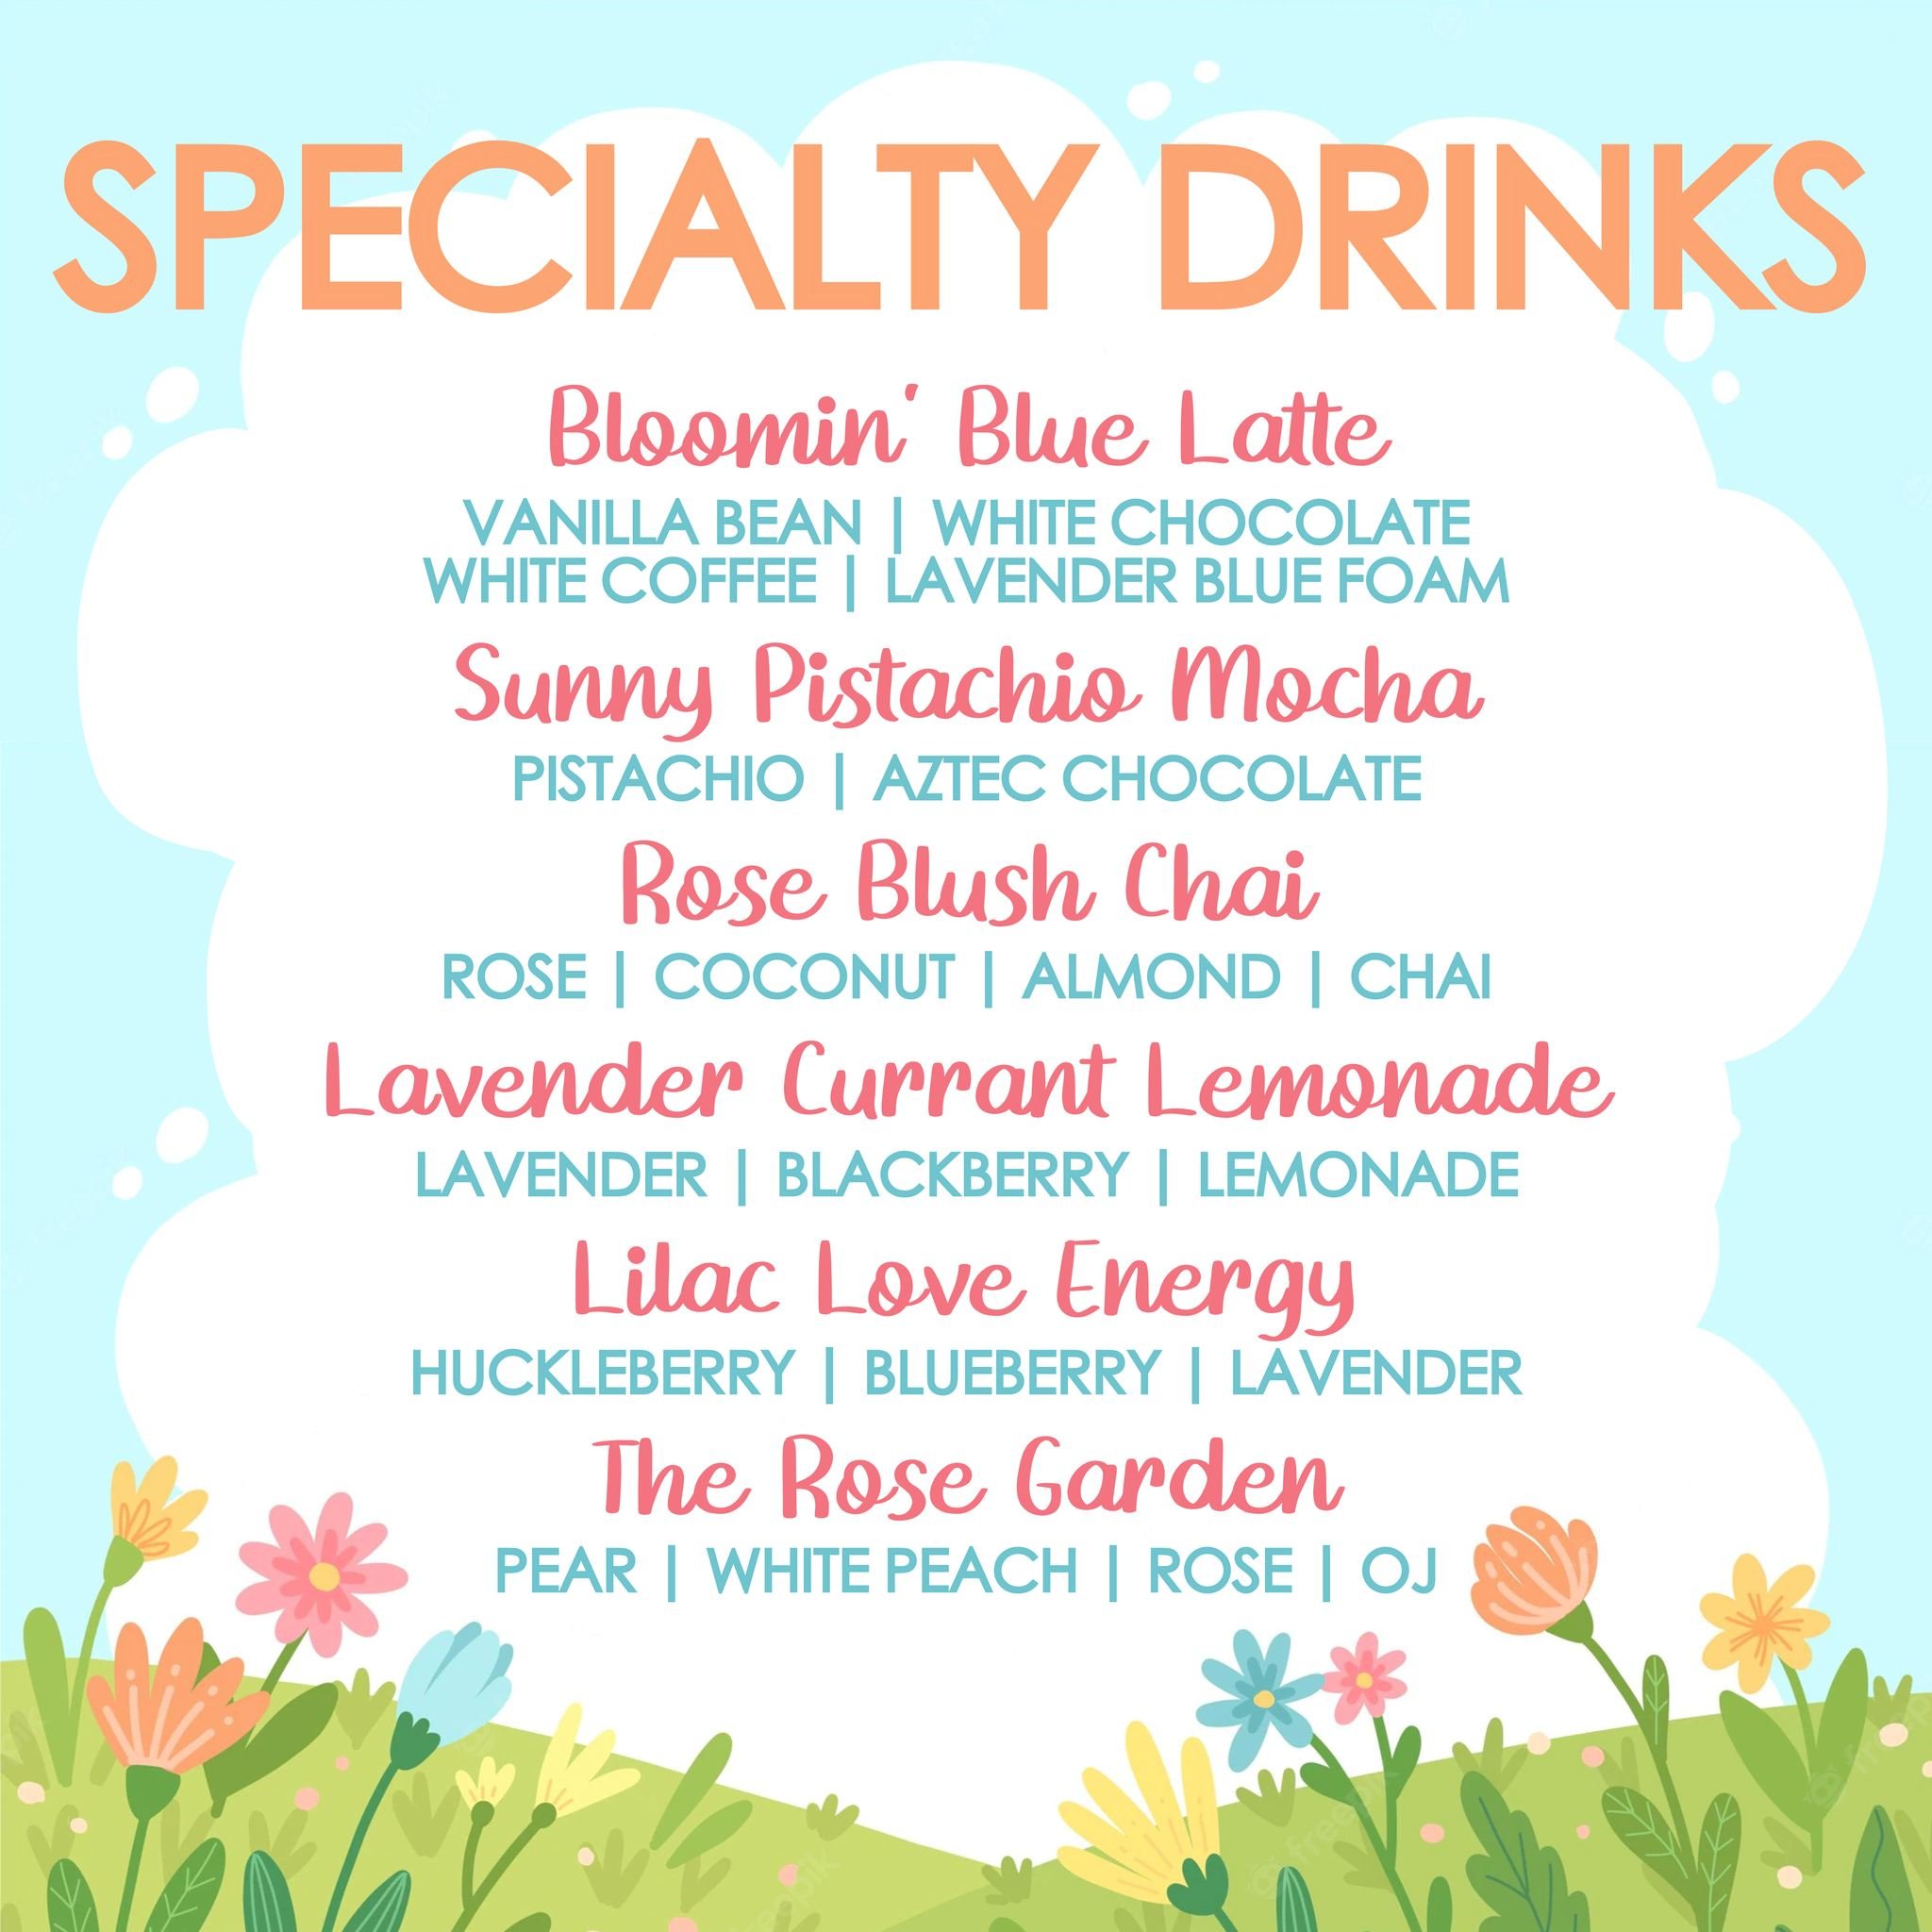 Spring specials~ Which ones have been your favorite? 
🌸🌱🌼🌿🌷